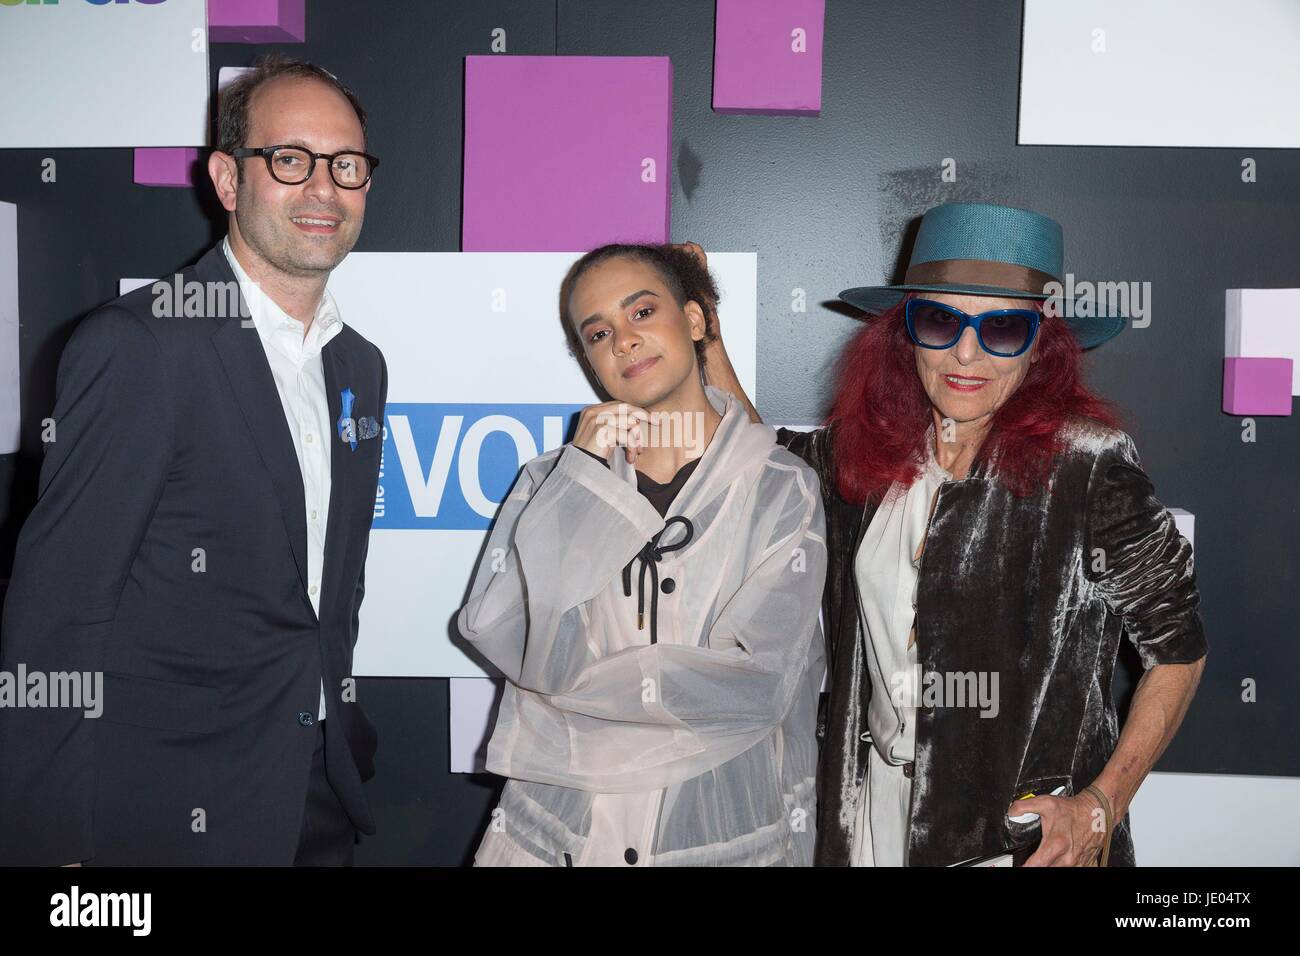 New York, NY, USA. 21st June, 2017. Guest, Tyler Ford, Patricia Field at arrivals for The Village Voice Pride Awards, Capitale, New York, NY June 21, 2017. Credit: Lev Radin/Everett Collection/Alamy Live News Stock Photo